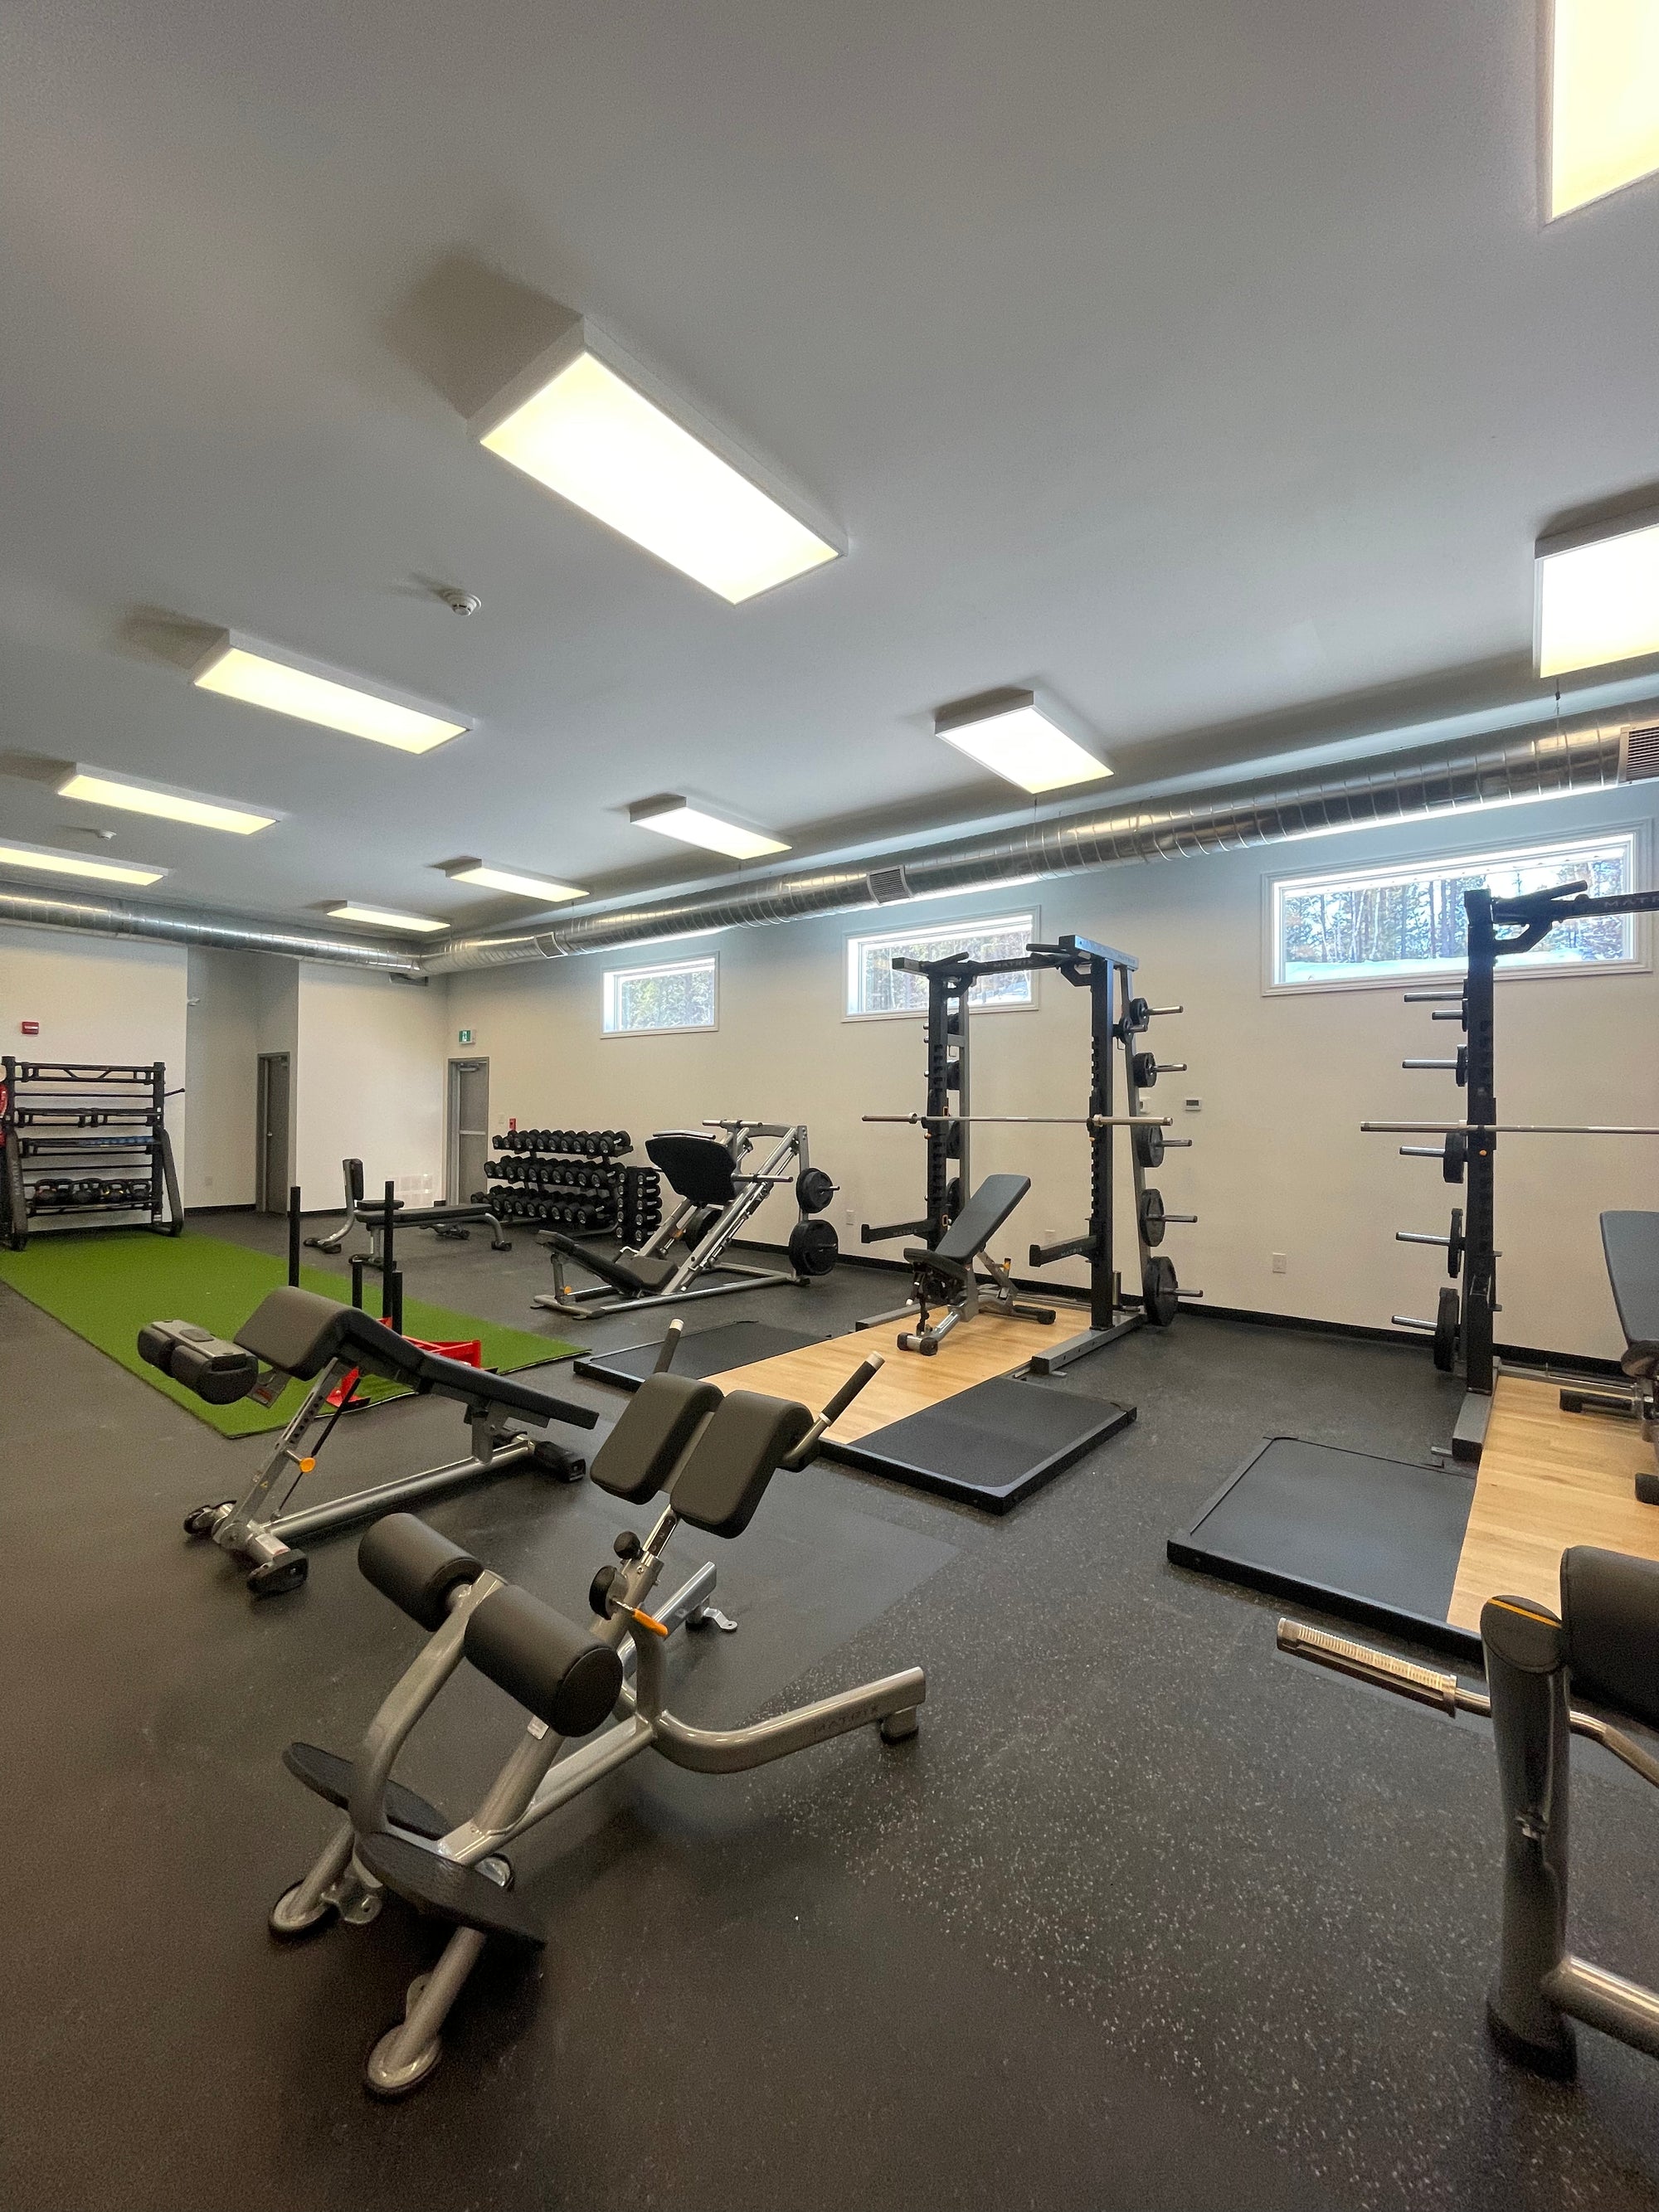 Starting or upgrading a gym? Talk to our expert consultants.